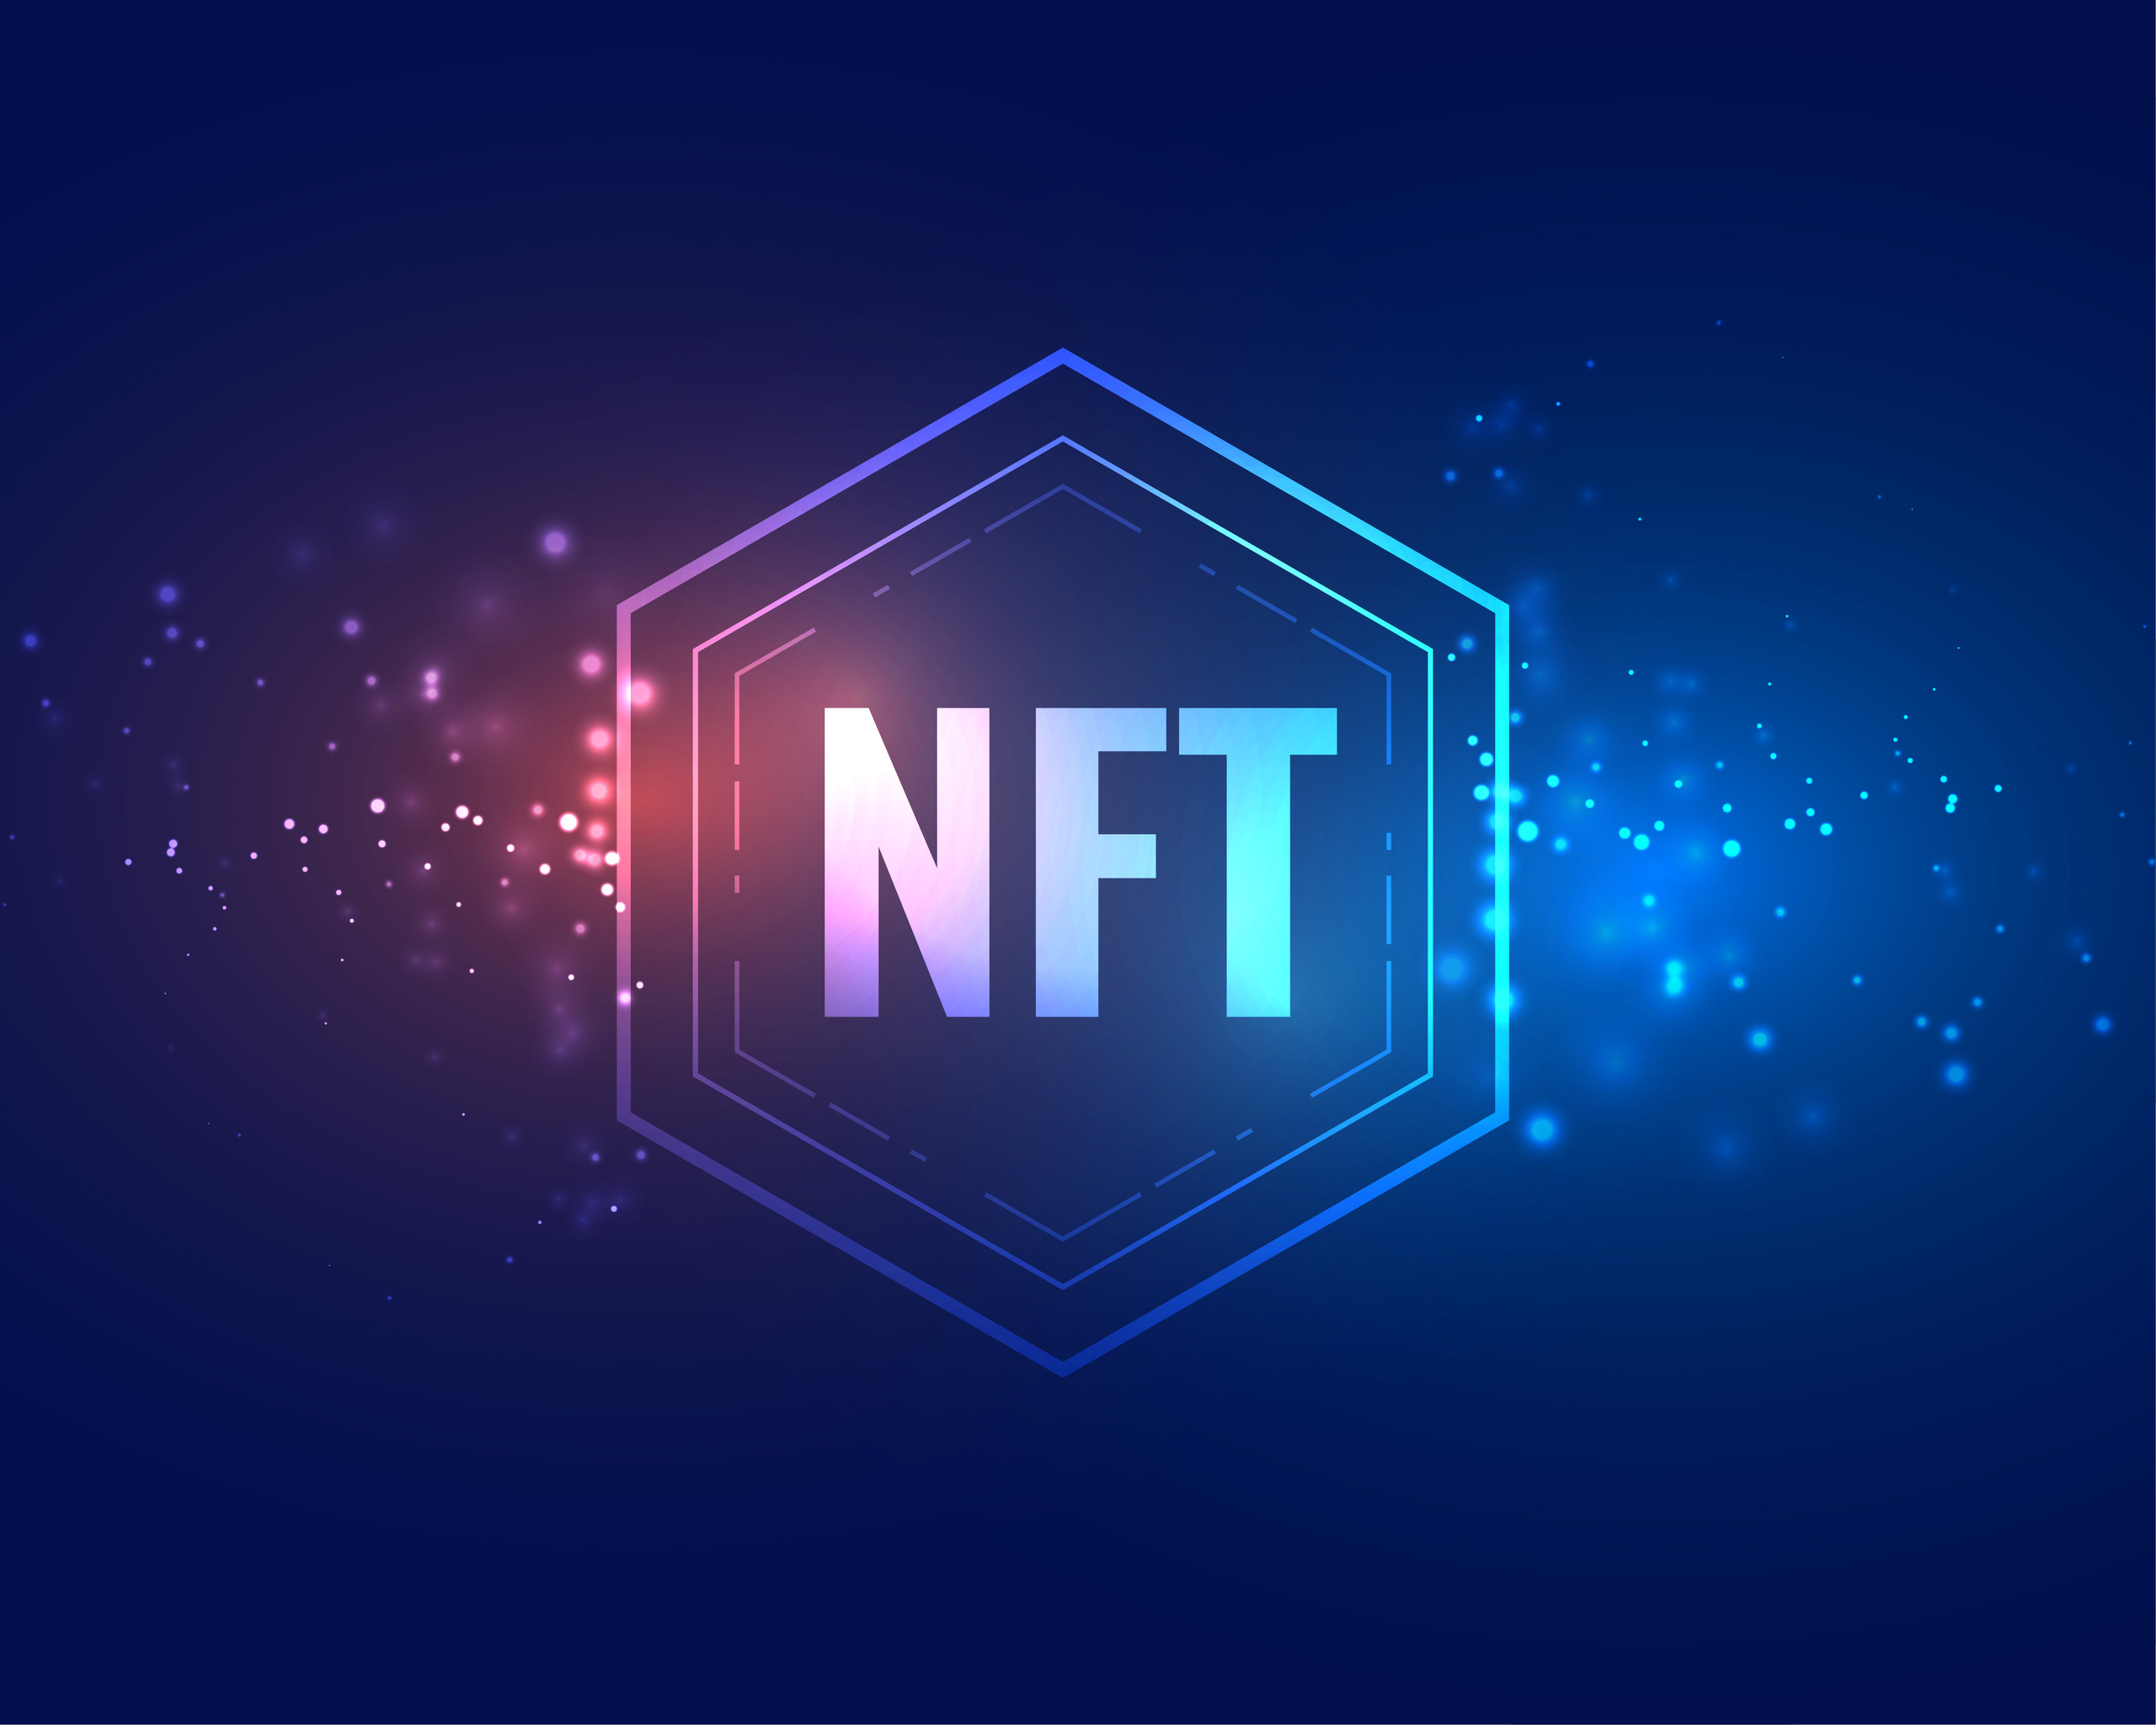 impact of nfts on digital art and collectibles